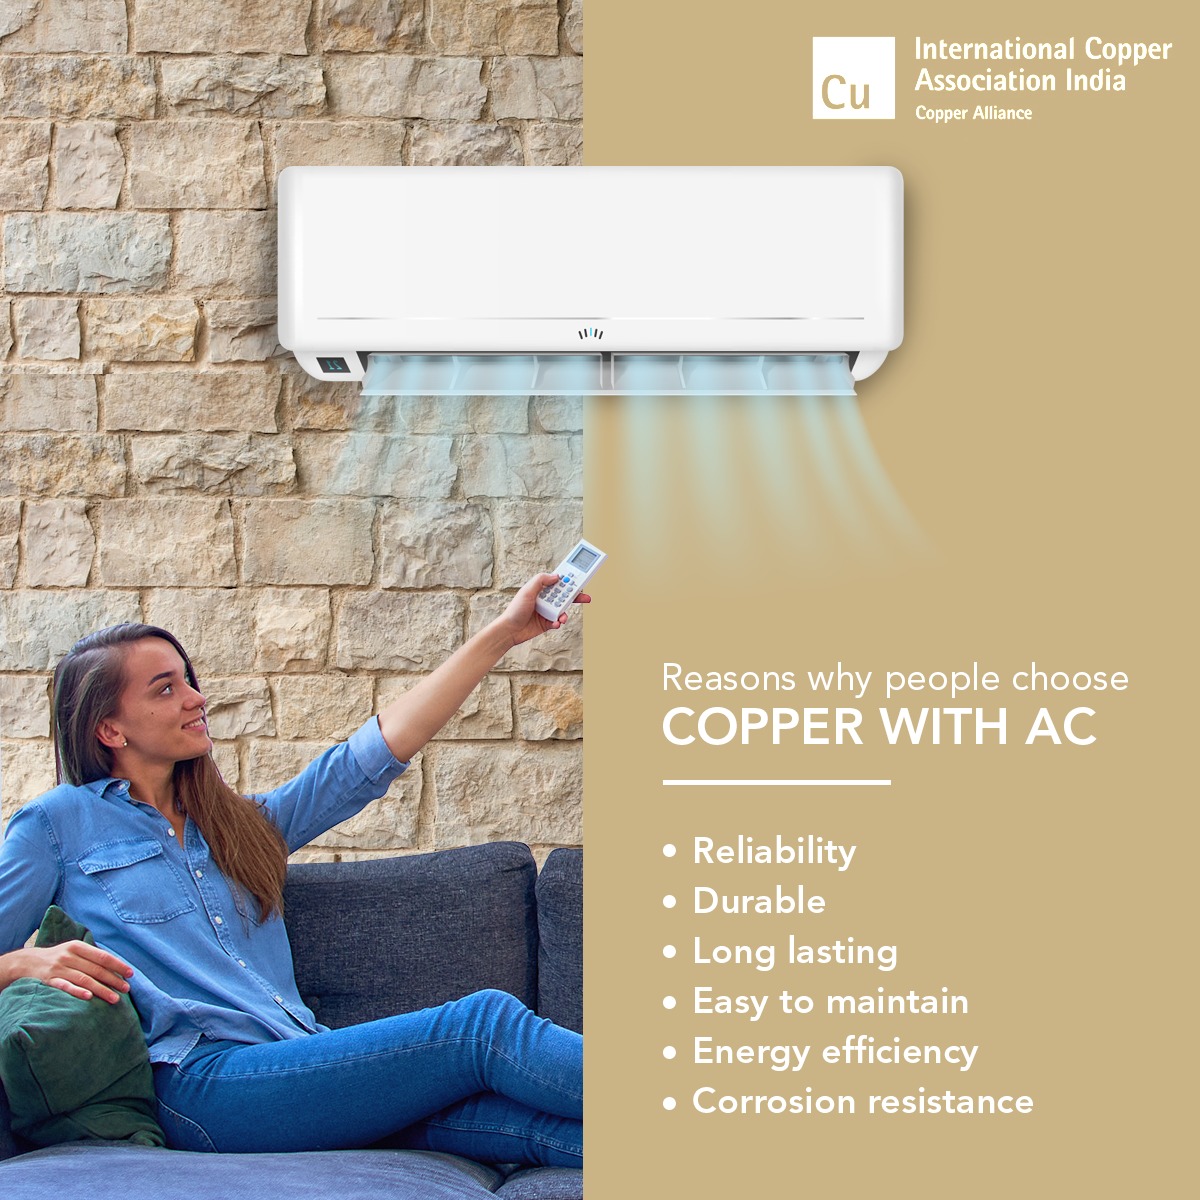 As per our survey by Neilsen IQ, these are main reasons for consumers to choose Copper AC. What about you?

#BeatTheHeat #Acs #BuyingCriteria #SummerSeason #CoolingCapacity #Durable #HomeAppliances #SummerProblems #CopperAc #Copper #CopperAlliance #LongLasting #EnergyEfficiency